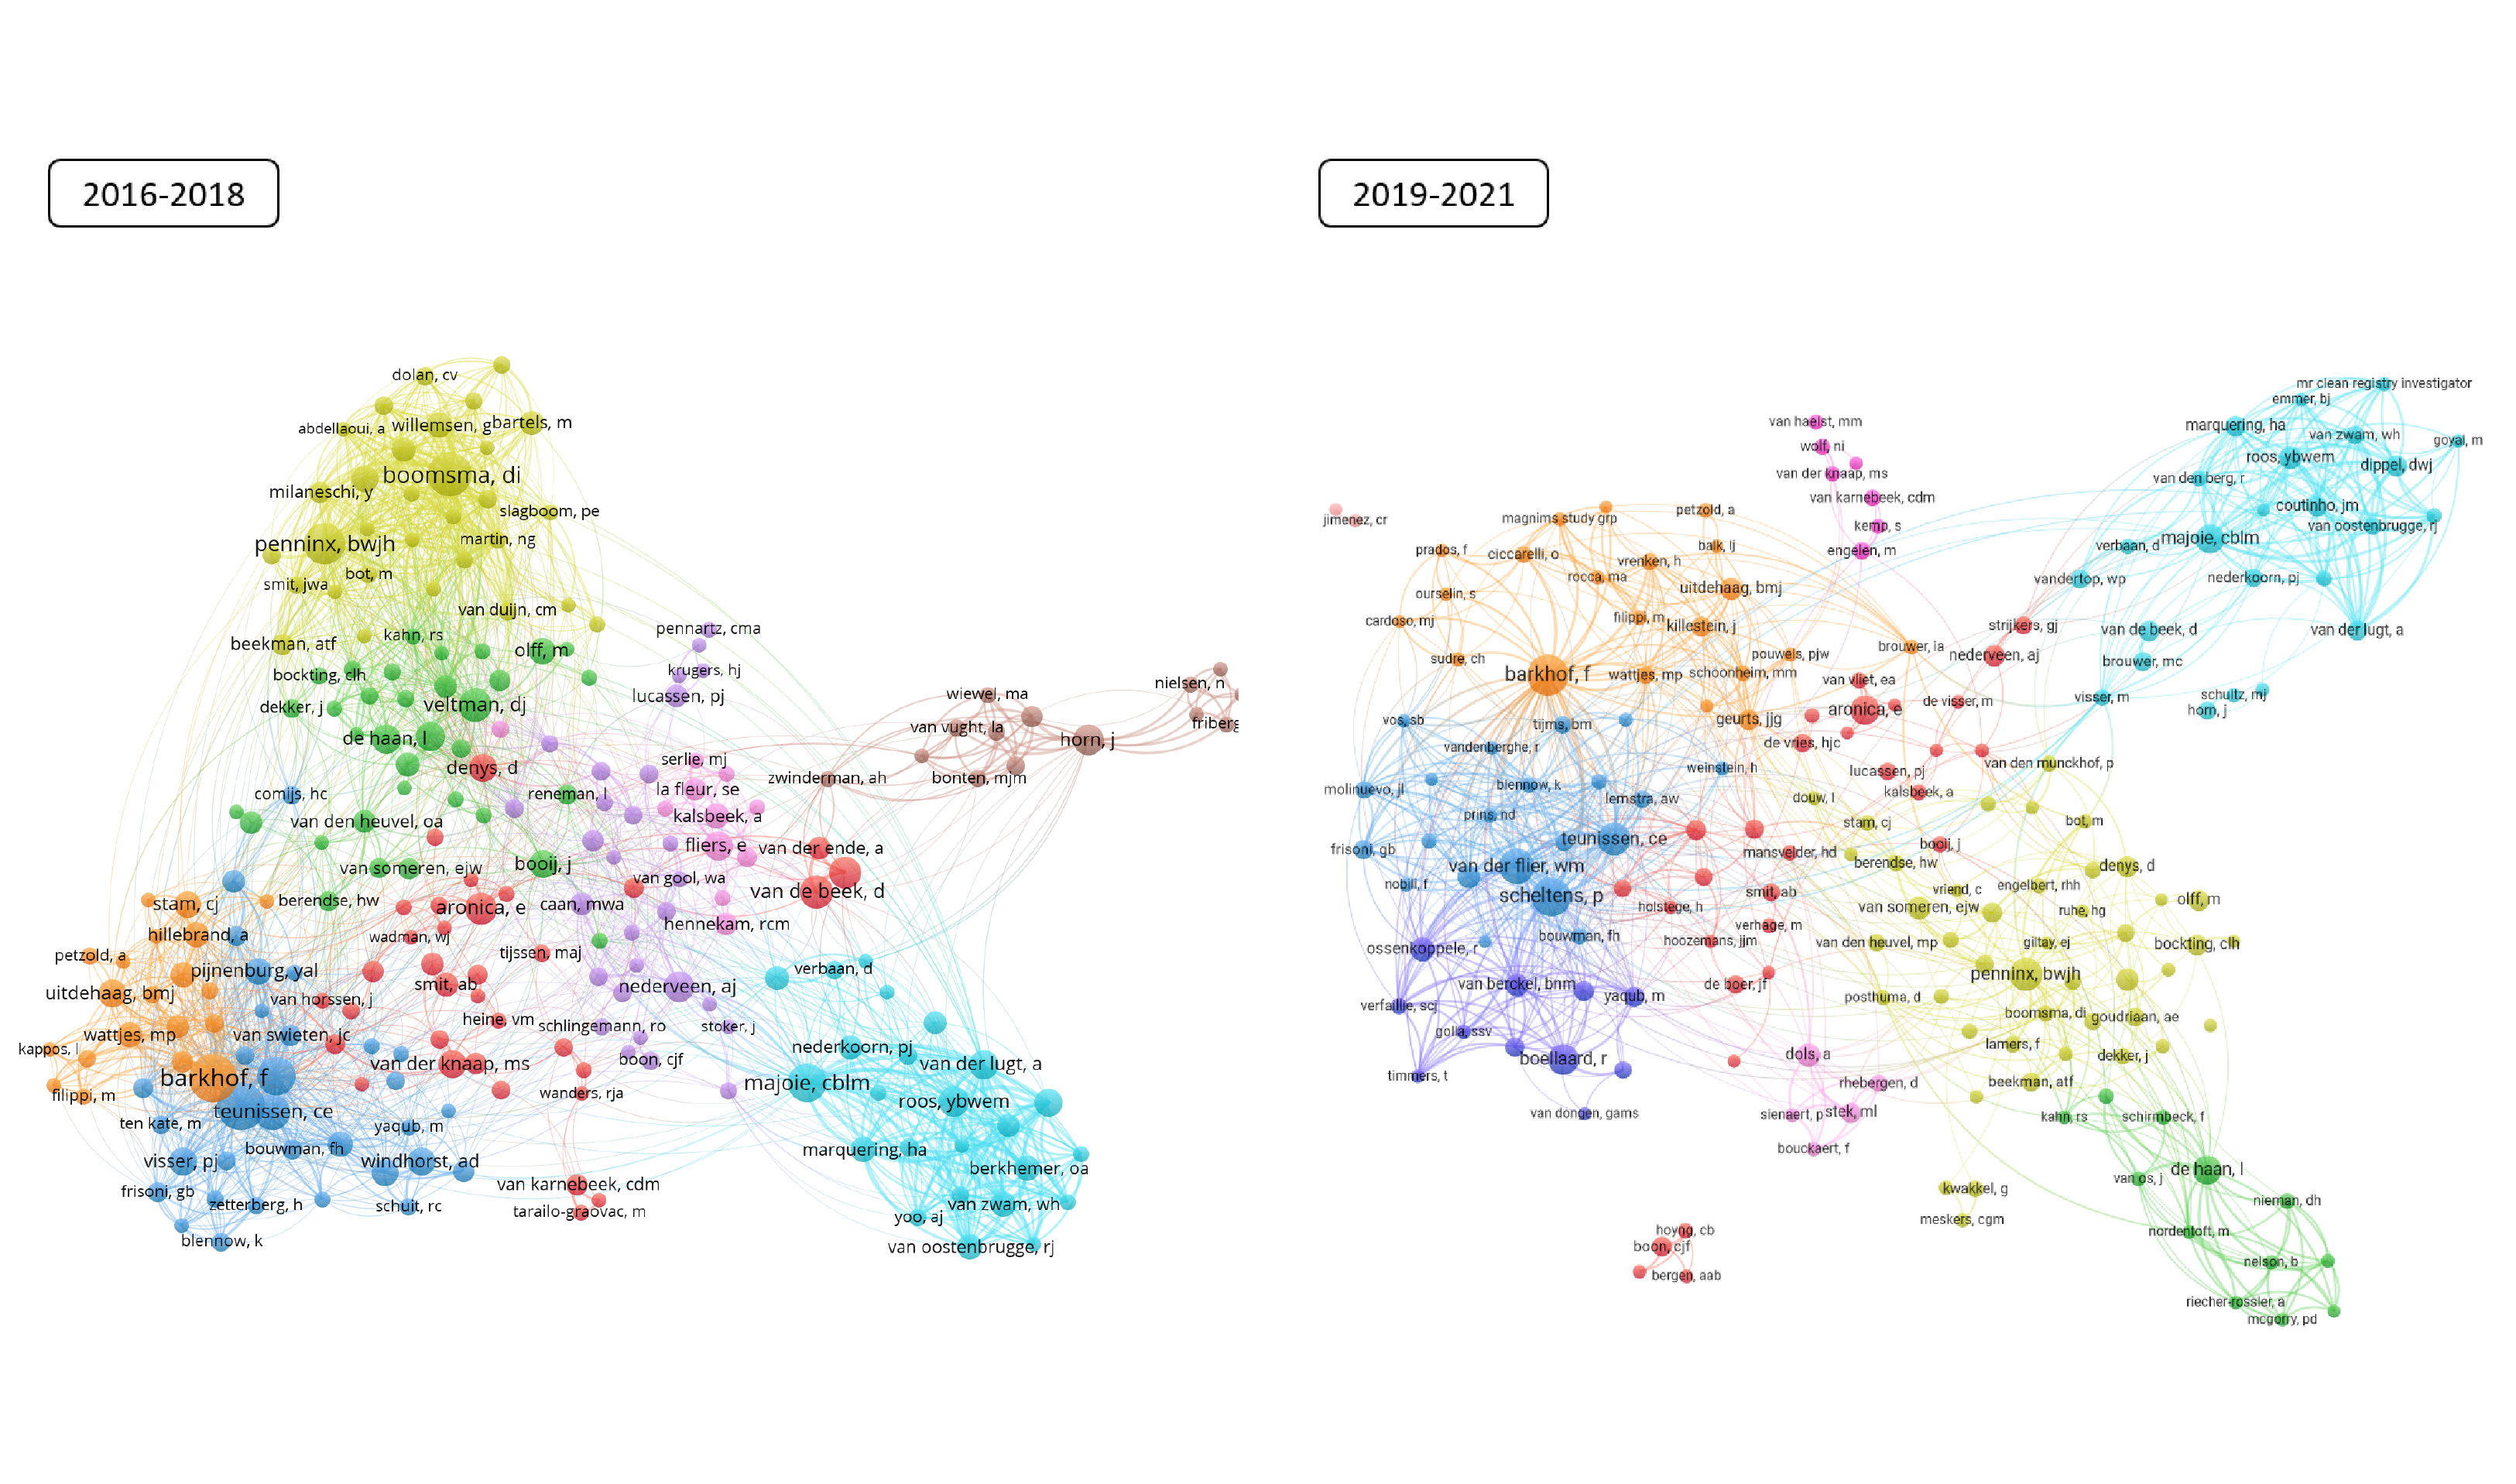 Figure 2 - The network of Amsterdam Neuroscience researchers in the two periods 2016-2018 and 2019-2021.